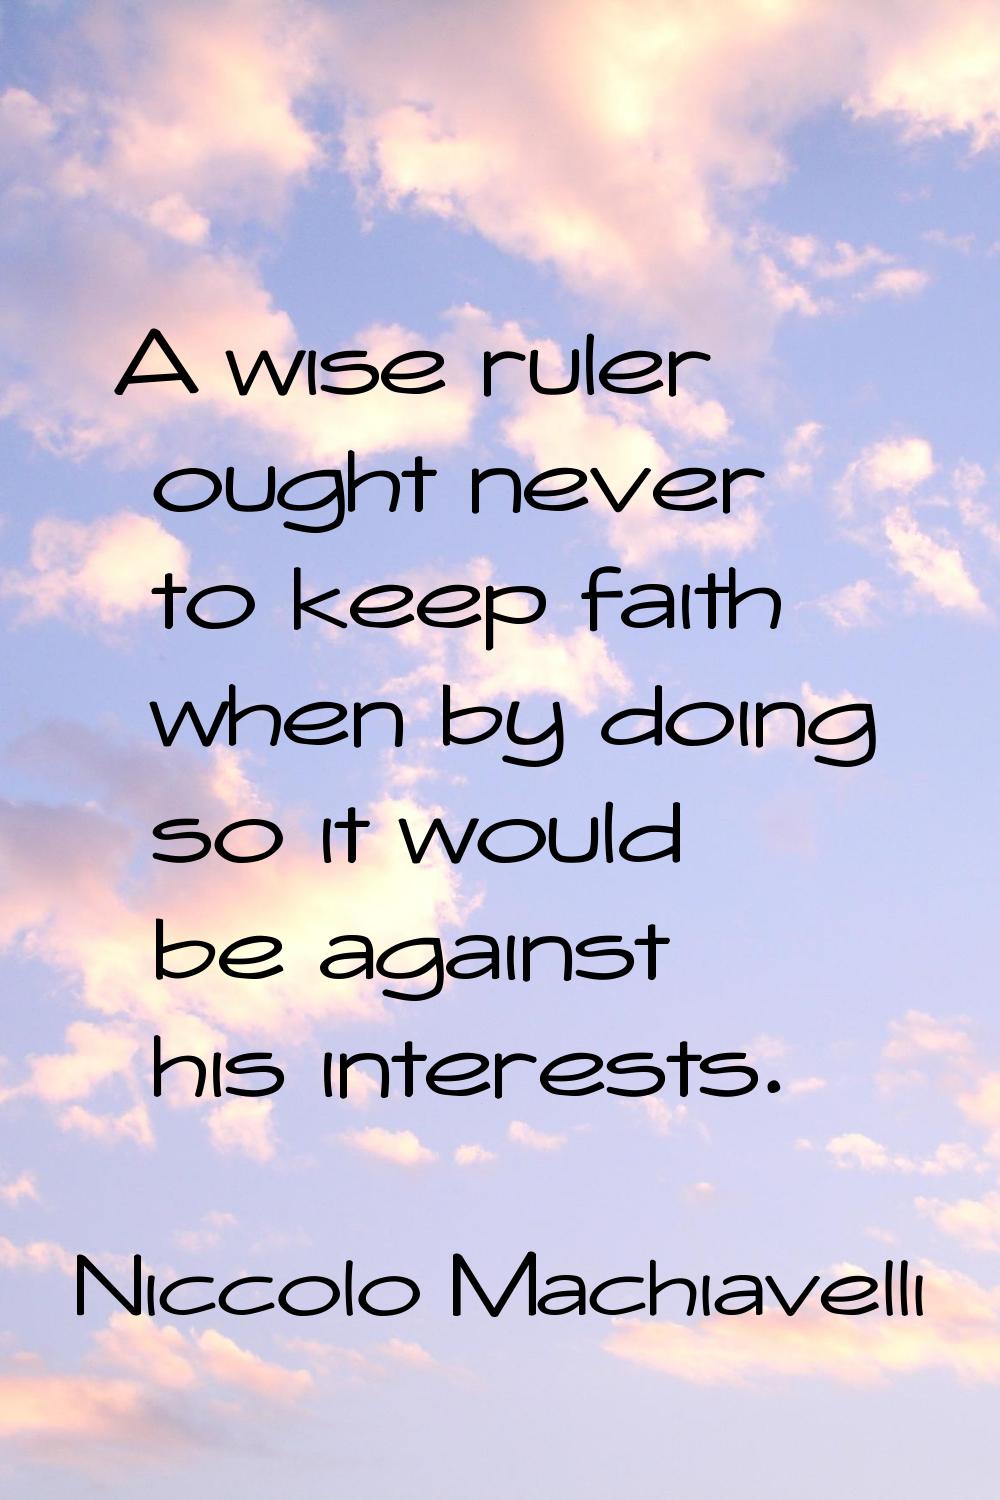 A wise ruler ought never to keep faith when by doing so it would be against his interests.